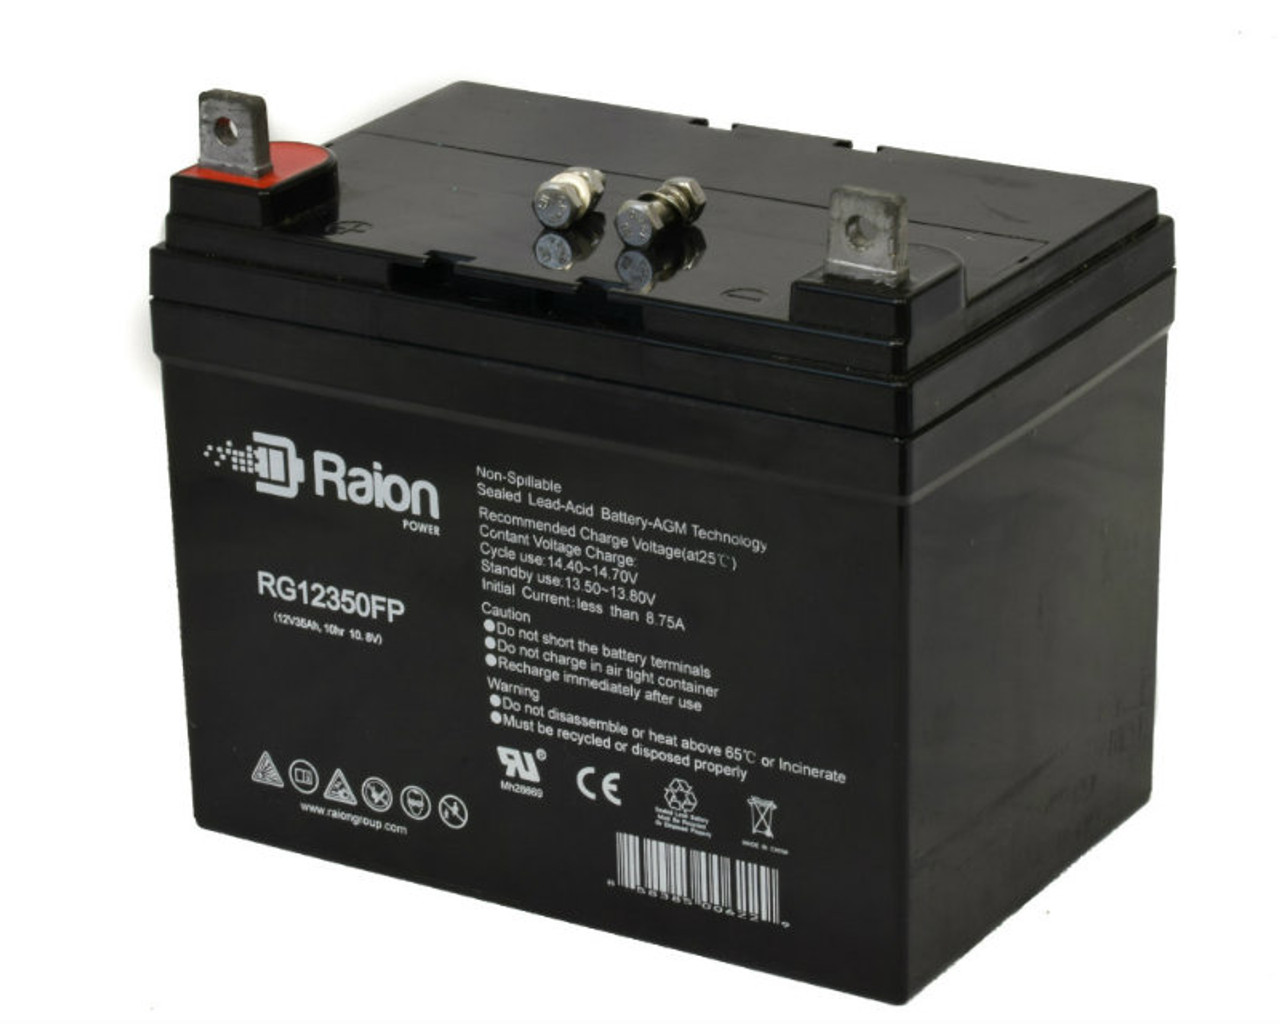 Raion Power Replacement 12V 35Ah RG12350FP Mobility Scooter Battery for Shoprider Sunrunner 3 888B-3